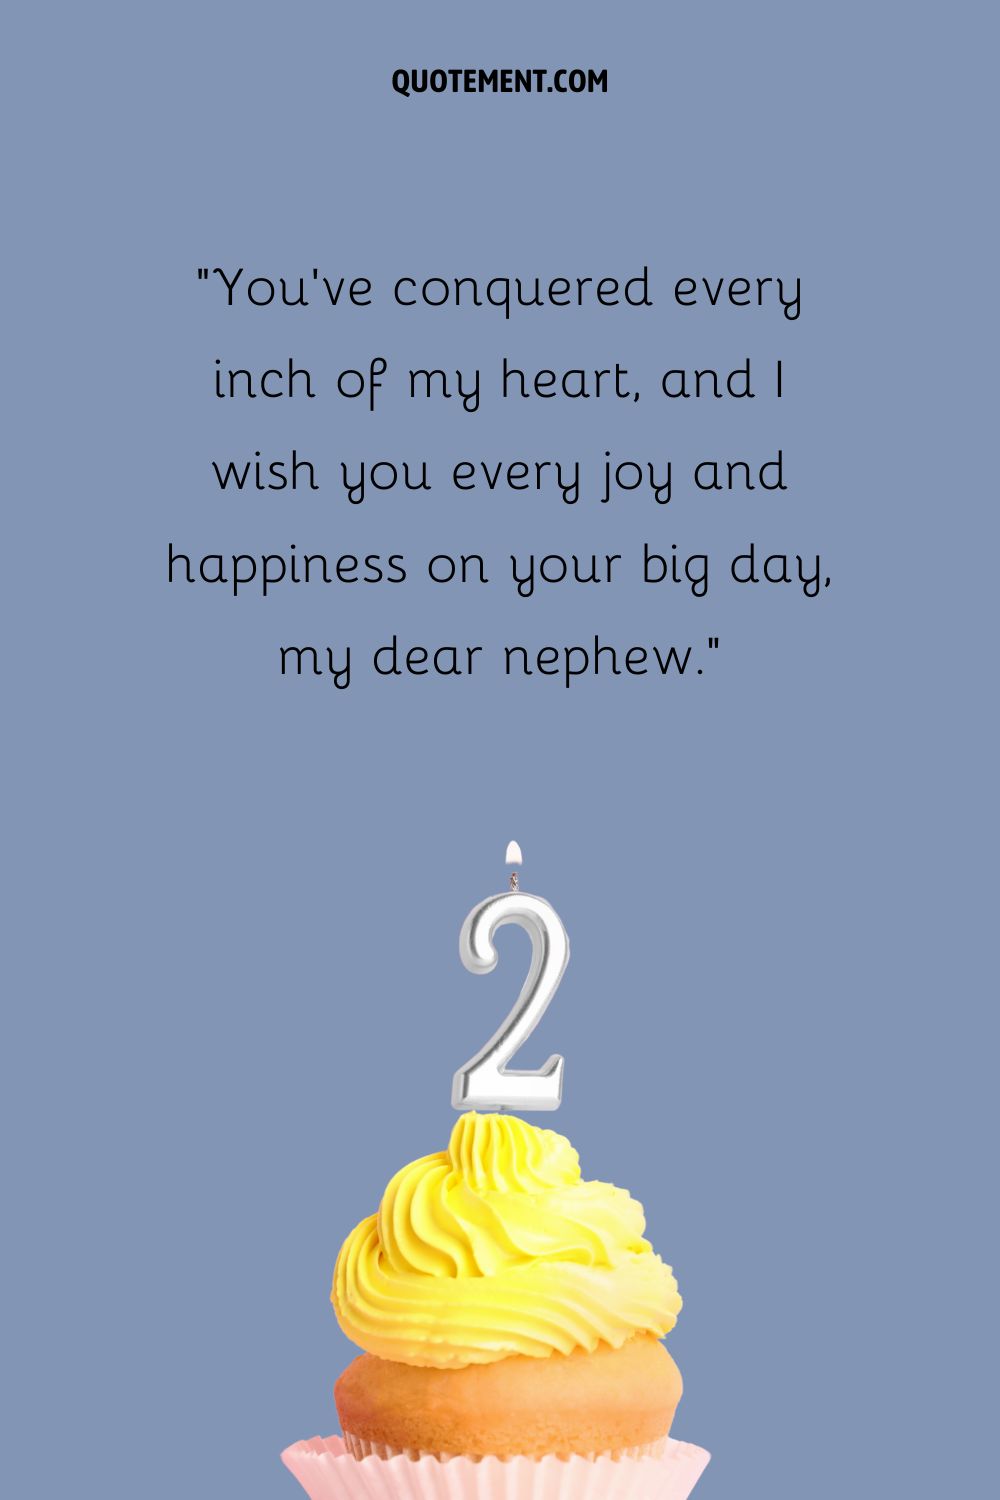 A cupcake with yellow frosting and a birthday candle in the shape of number two on top